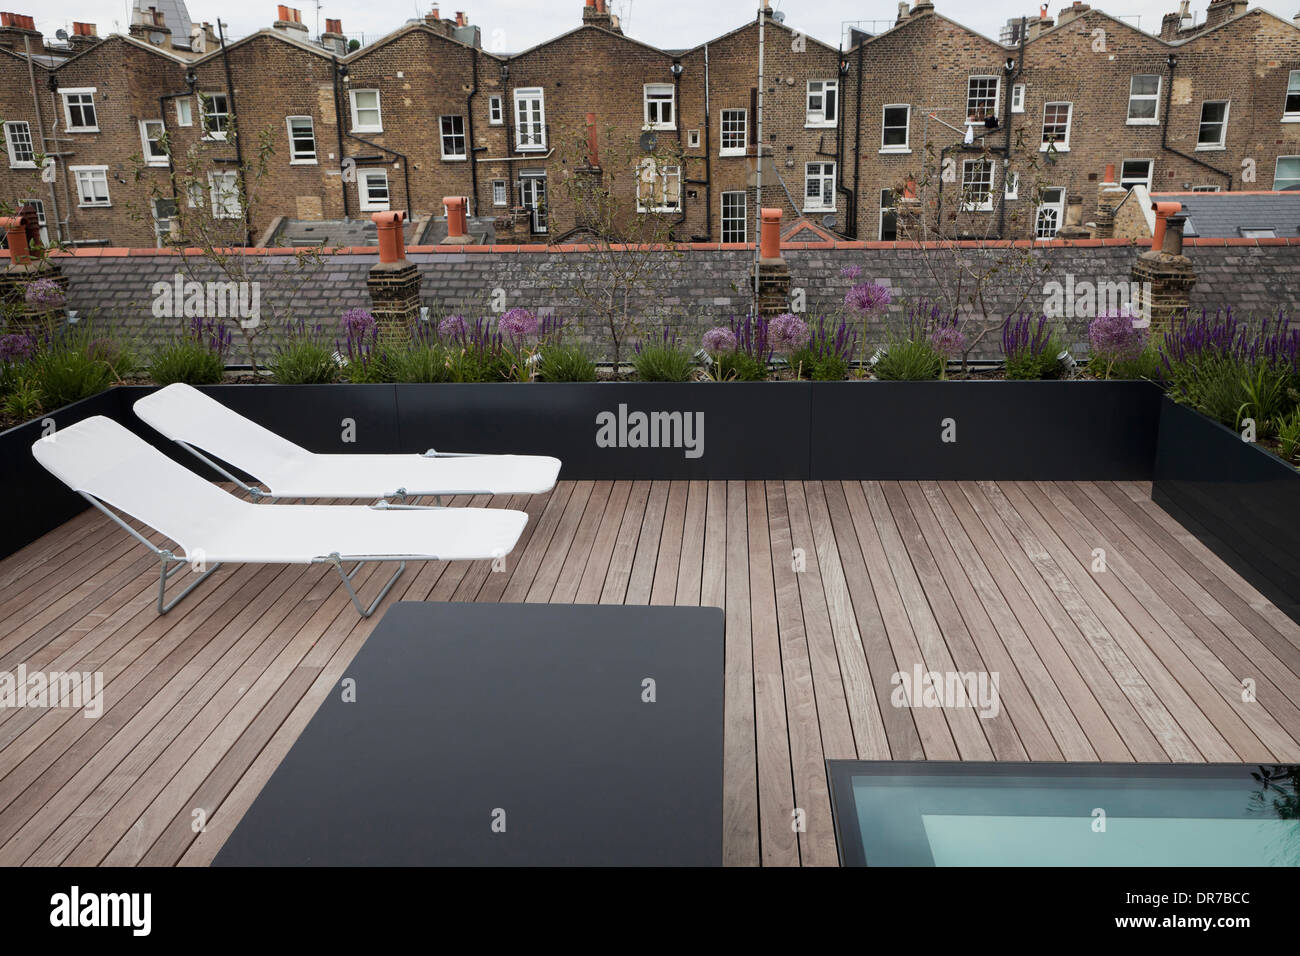 Decked roof garden in Notting Hill London designed by Modular with MRJ Rundell & Associates Ltd showing rear view of adjacent Stock Photo